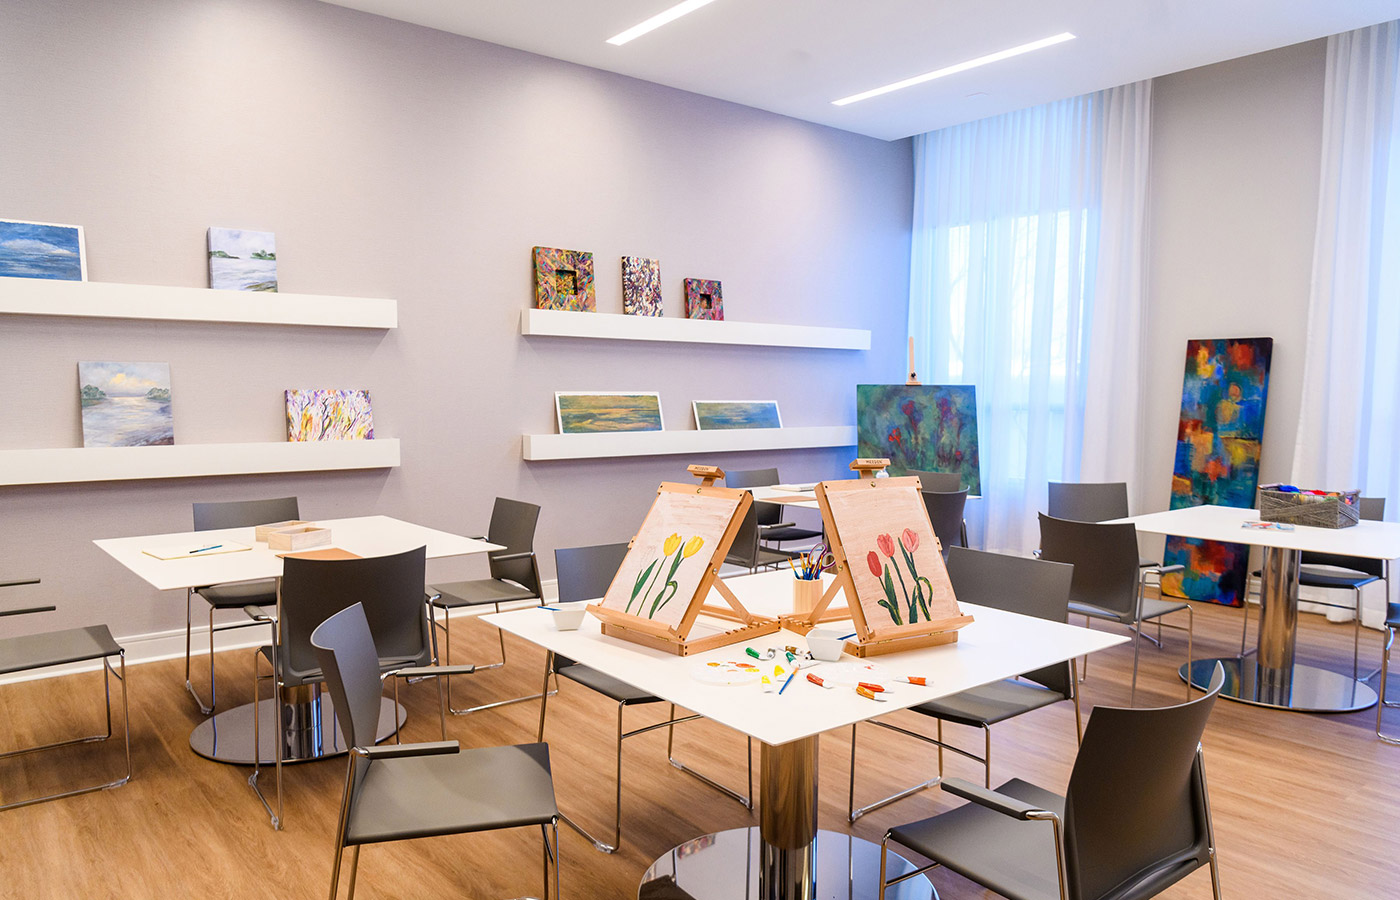 An art room at The Watermark at Houston Heights.